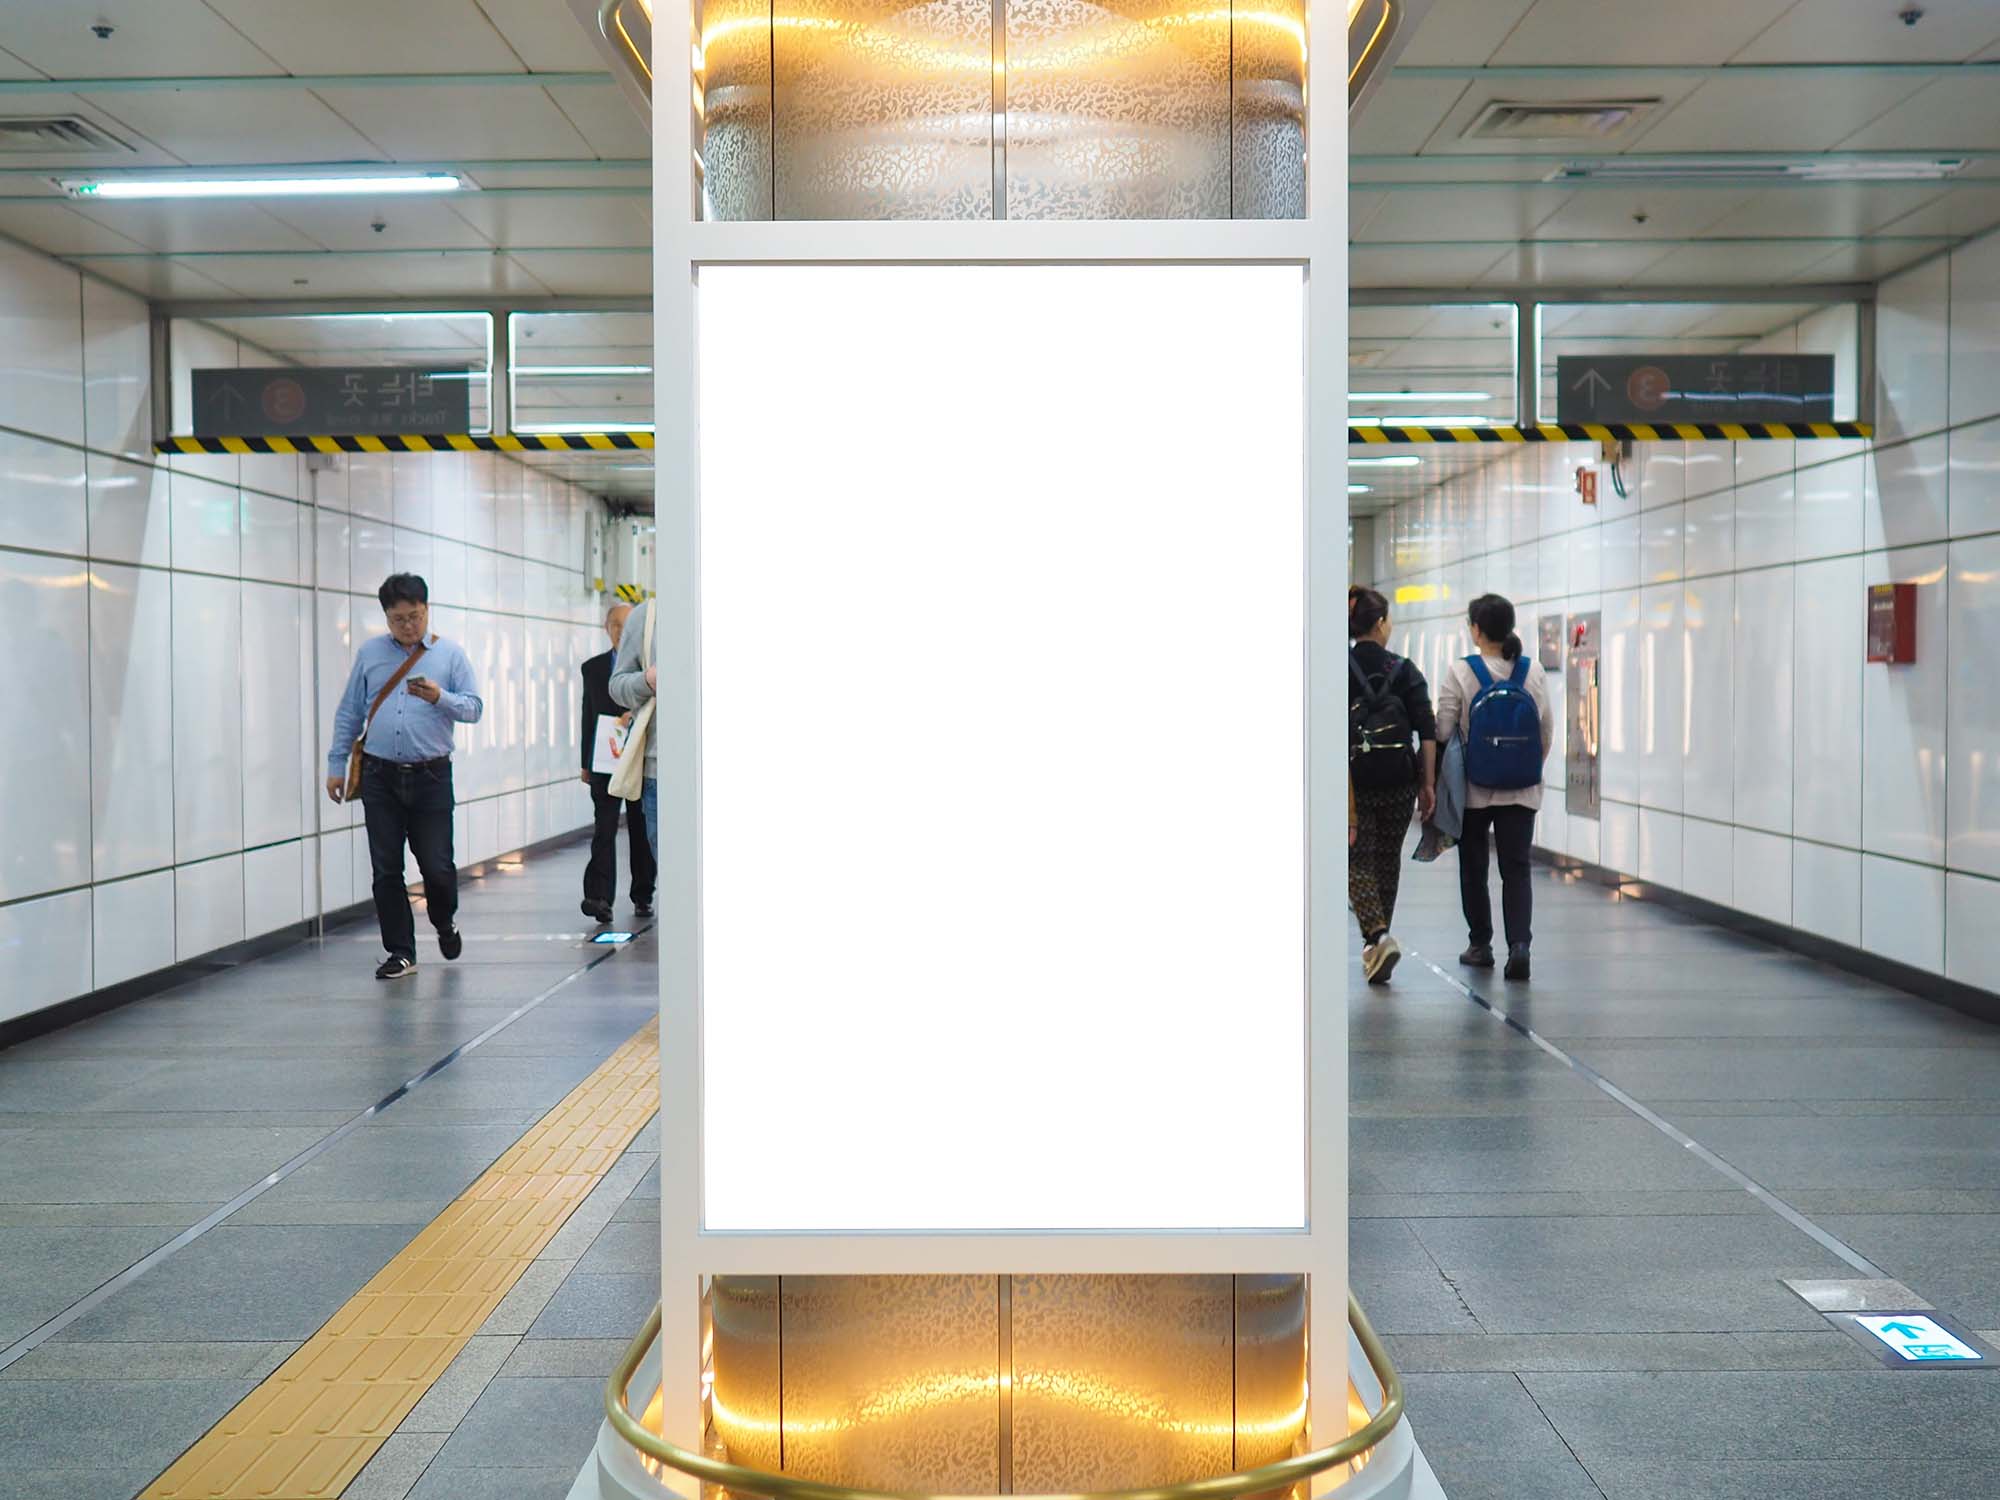 Download Poster Mockup Free Psd Subwasy : Mupi Mockup In Subway Station Psd Template All Free Template ...